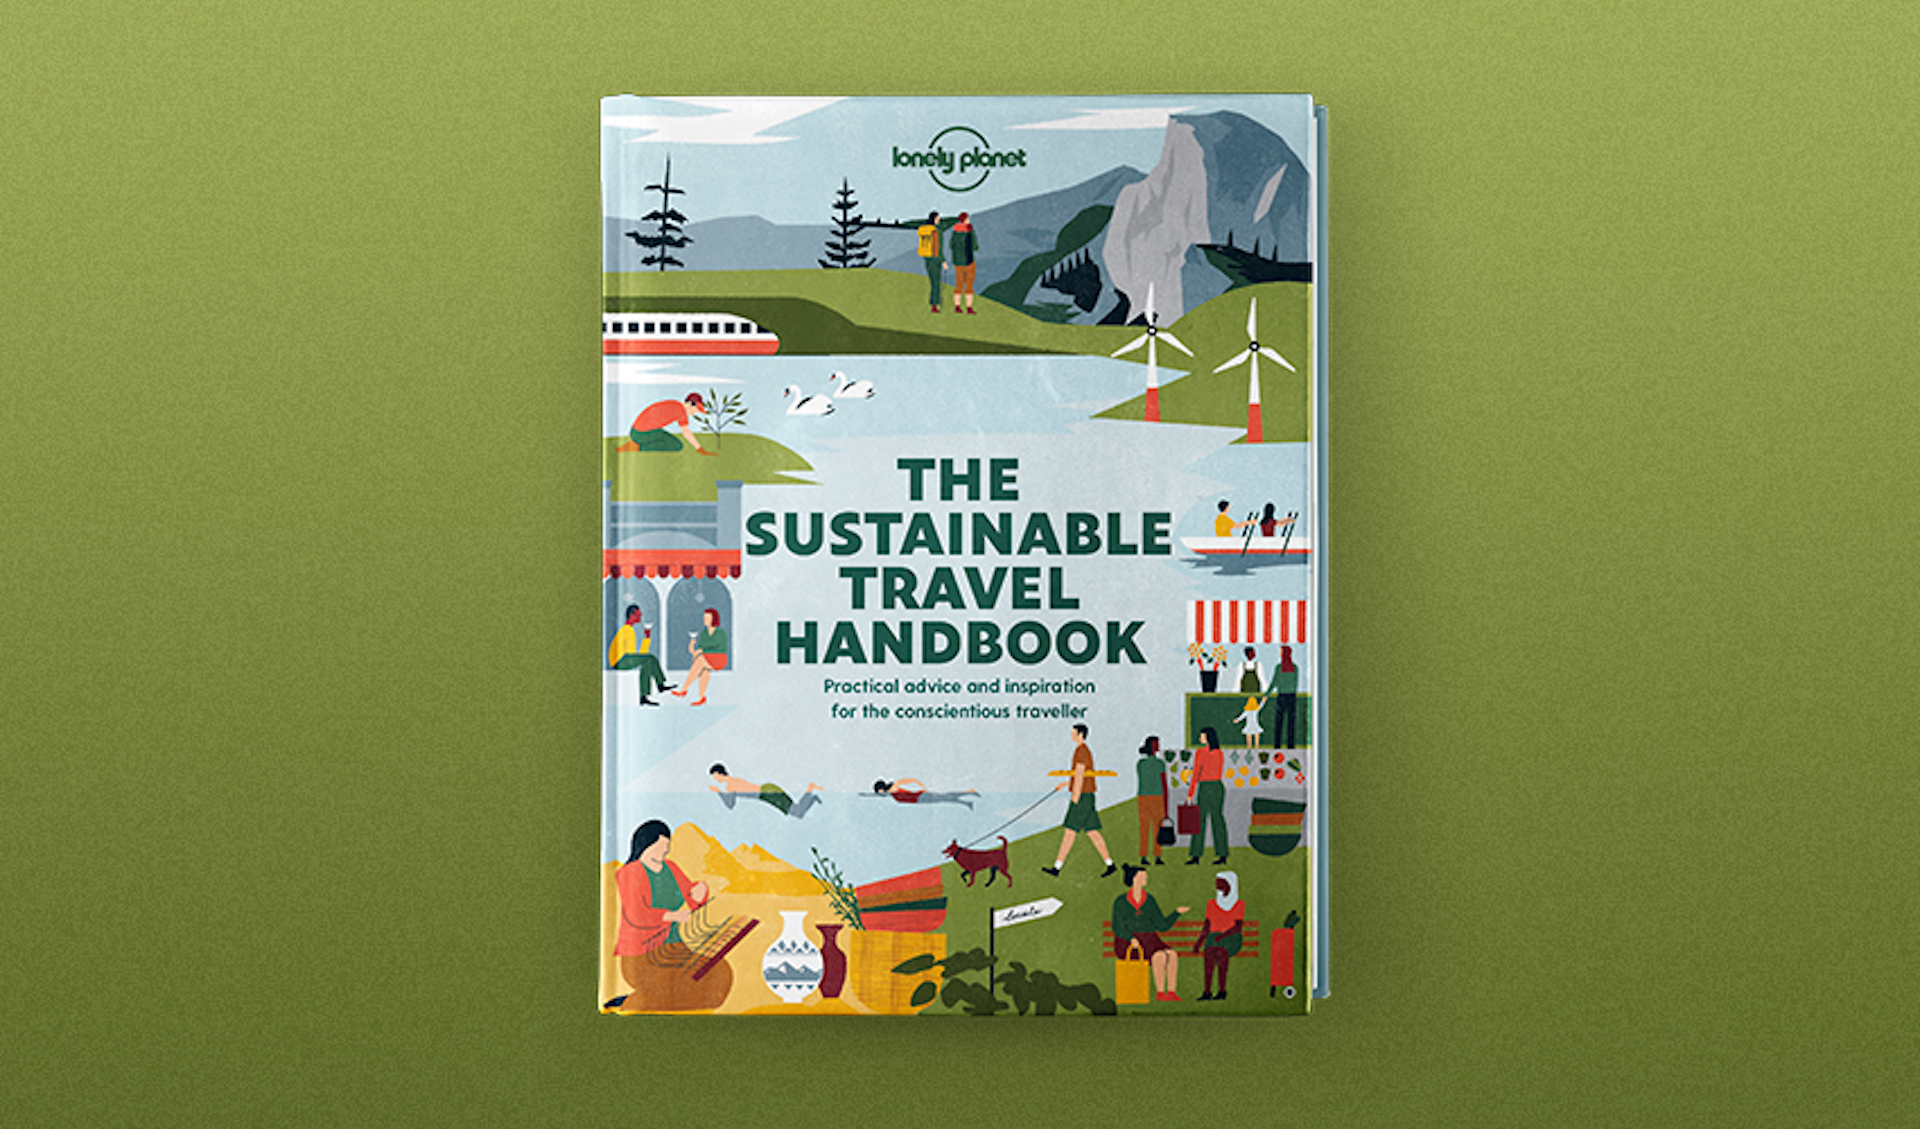 Book cover for Sustainable Travel Handbook, published by Lonely Planet, against a green background